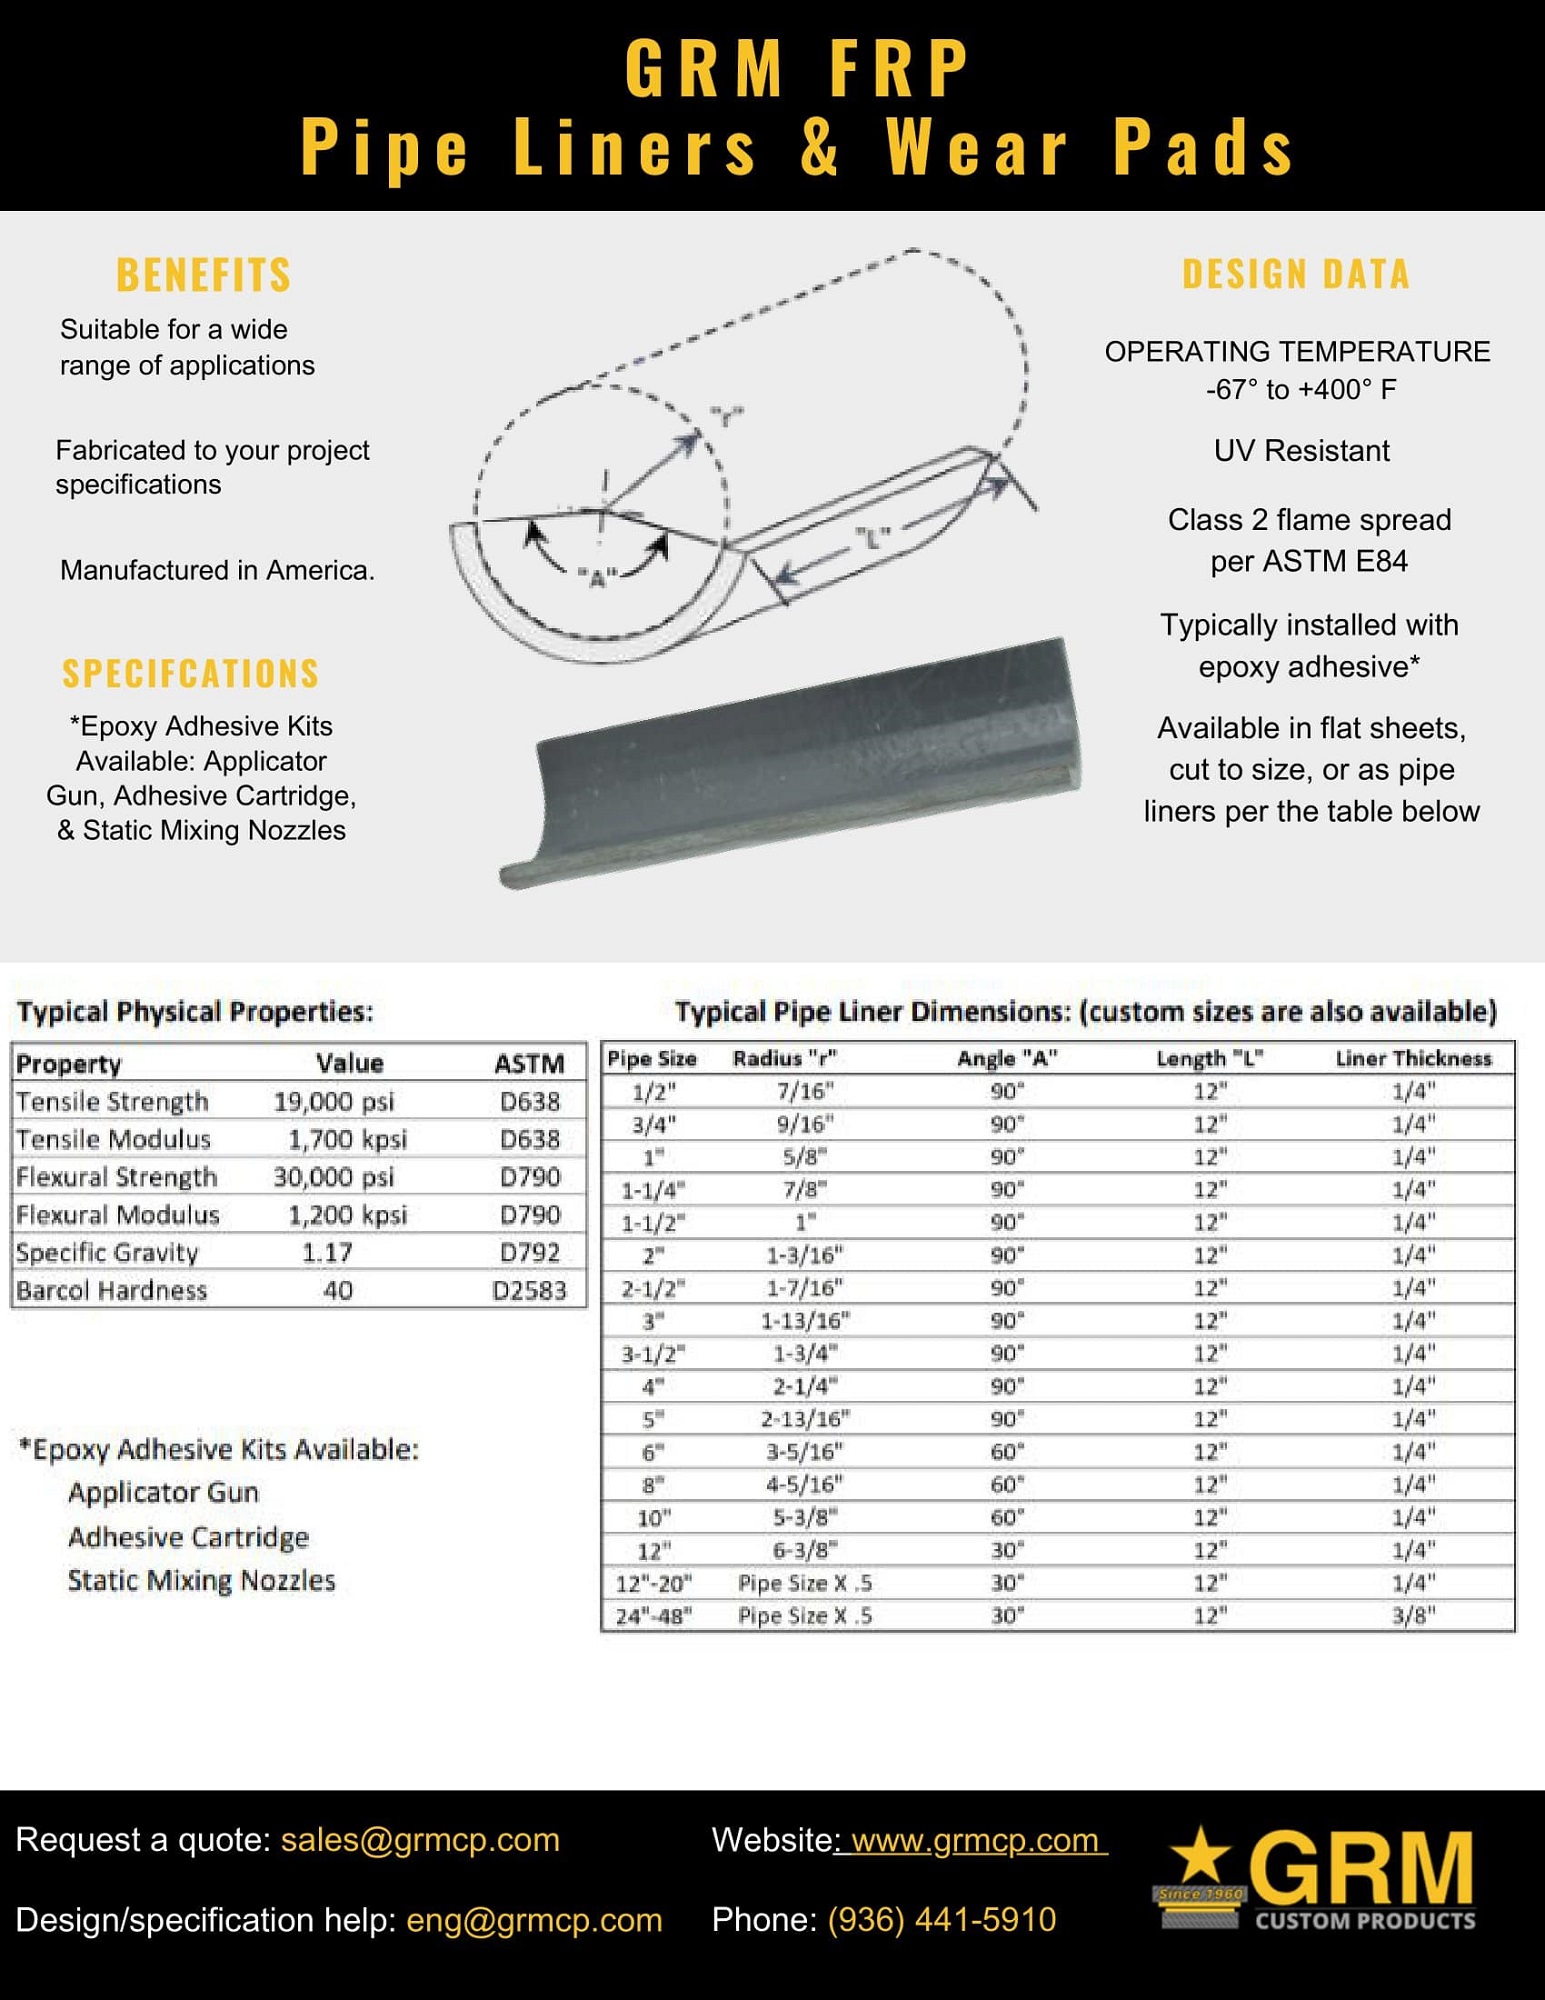 Product Data Sheet - GRM FRP Pipe Liners and Wear Pads